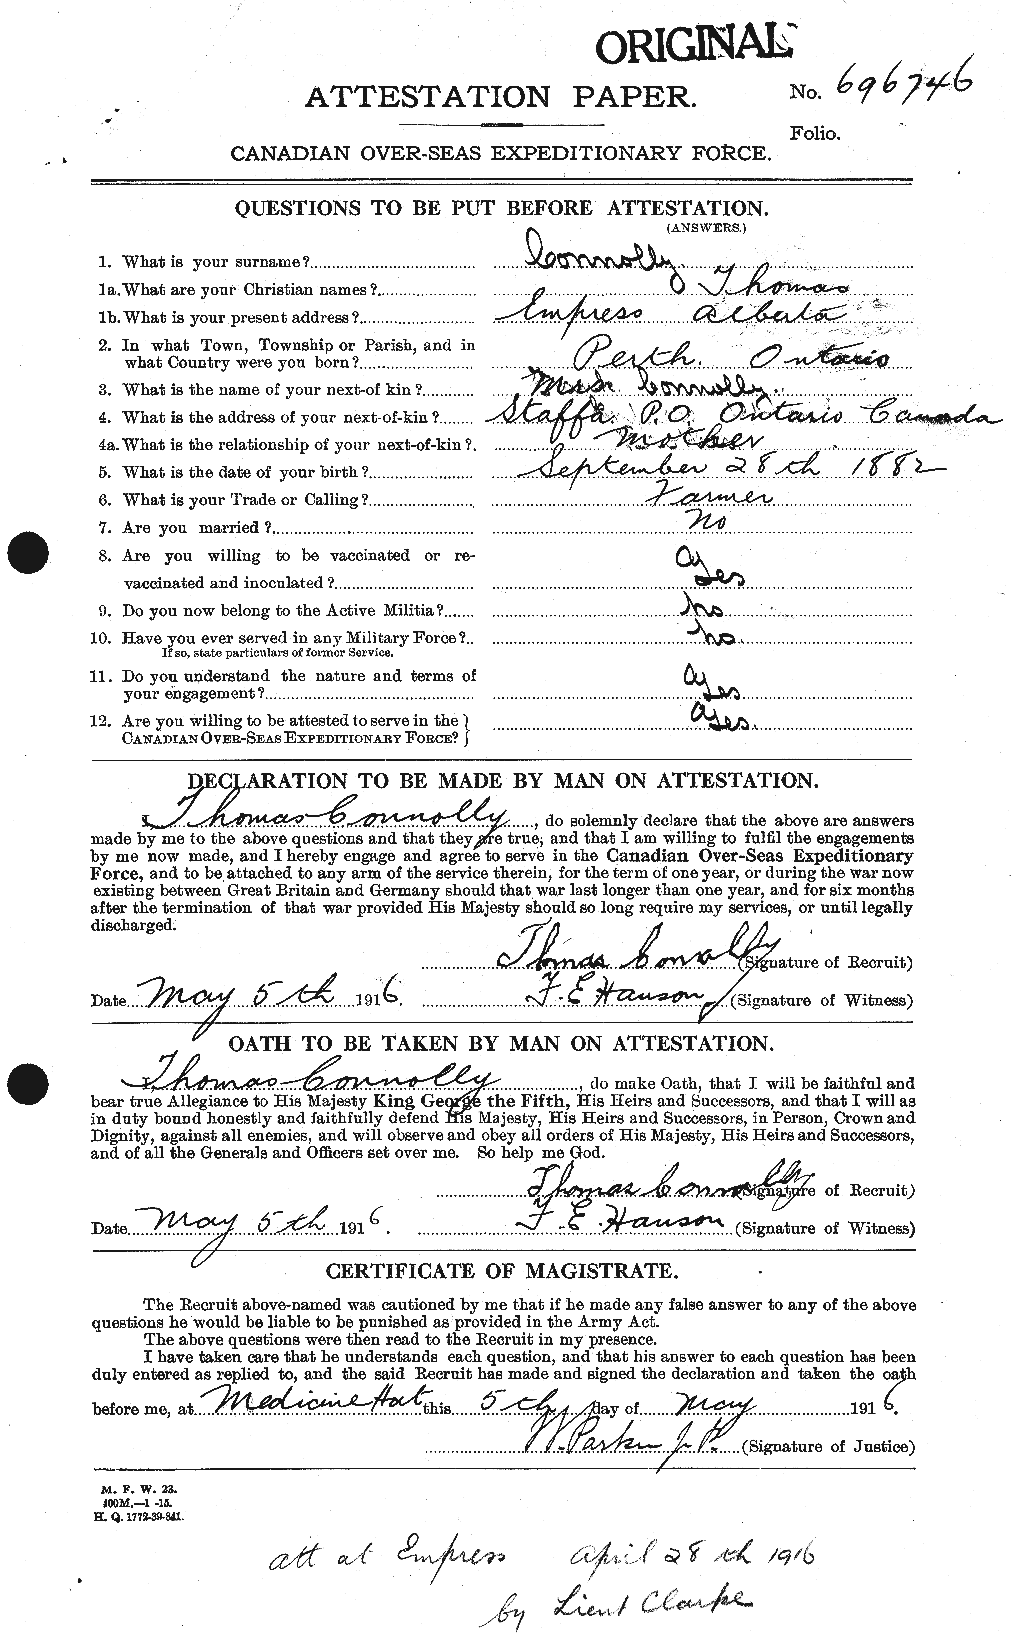 Personnel Records of the First World War - CEF 069041a